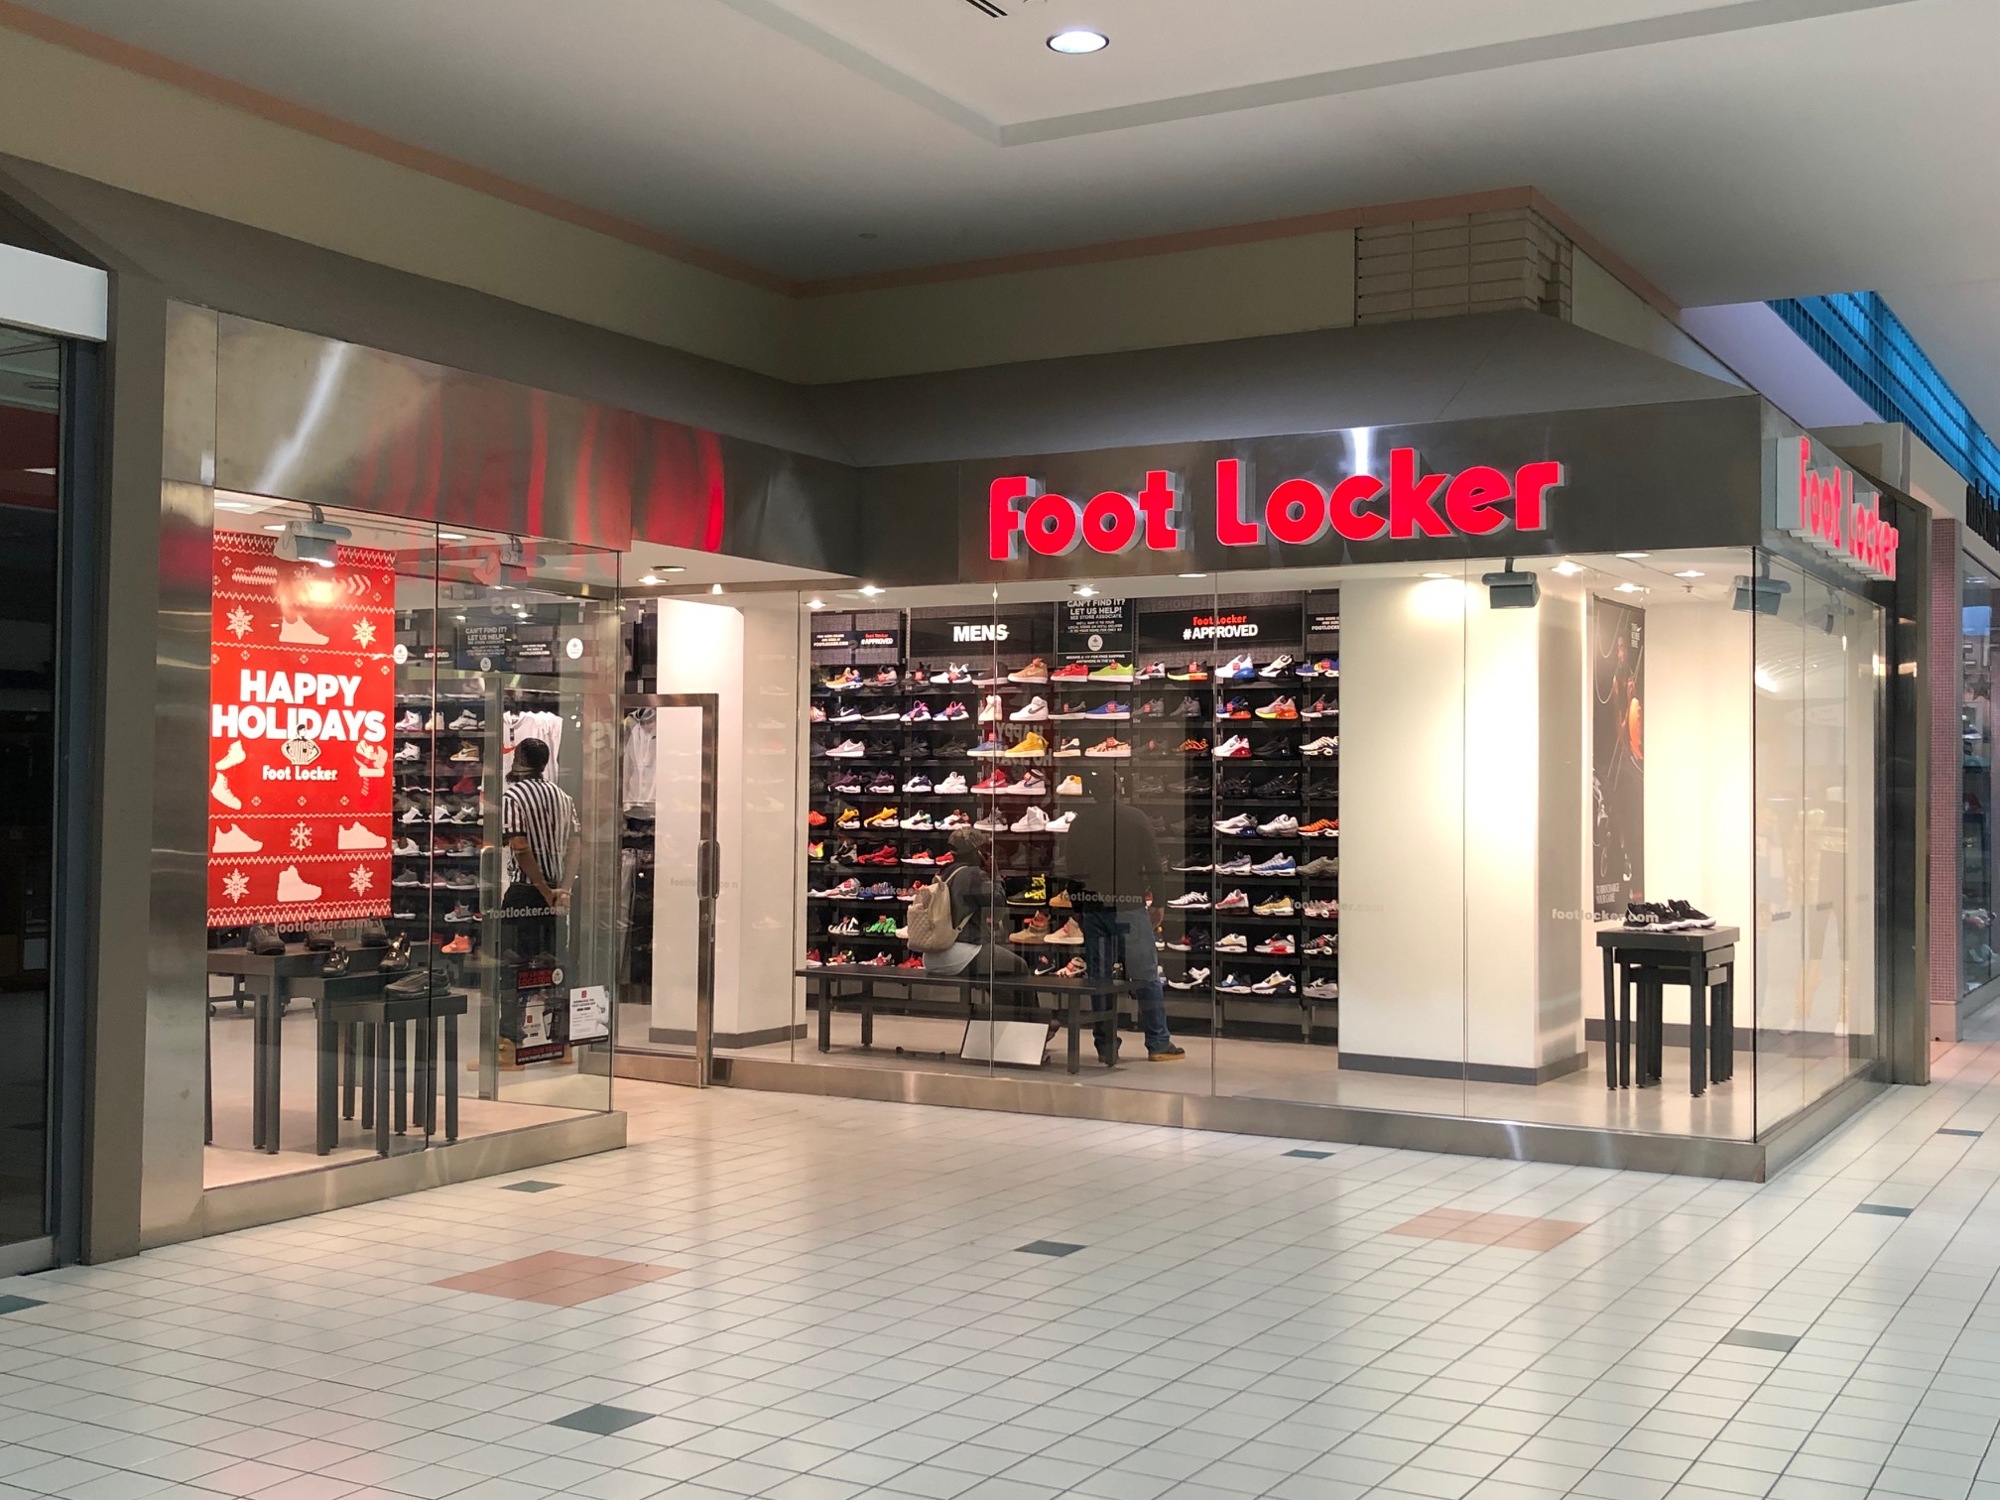 Foot Locker is one of the few national retail chains remaining at Regency Square Mall.